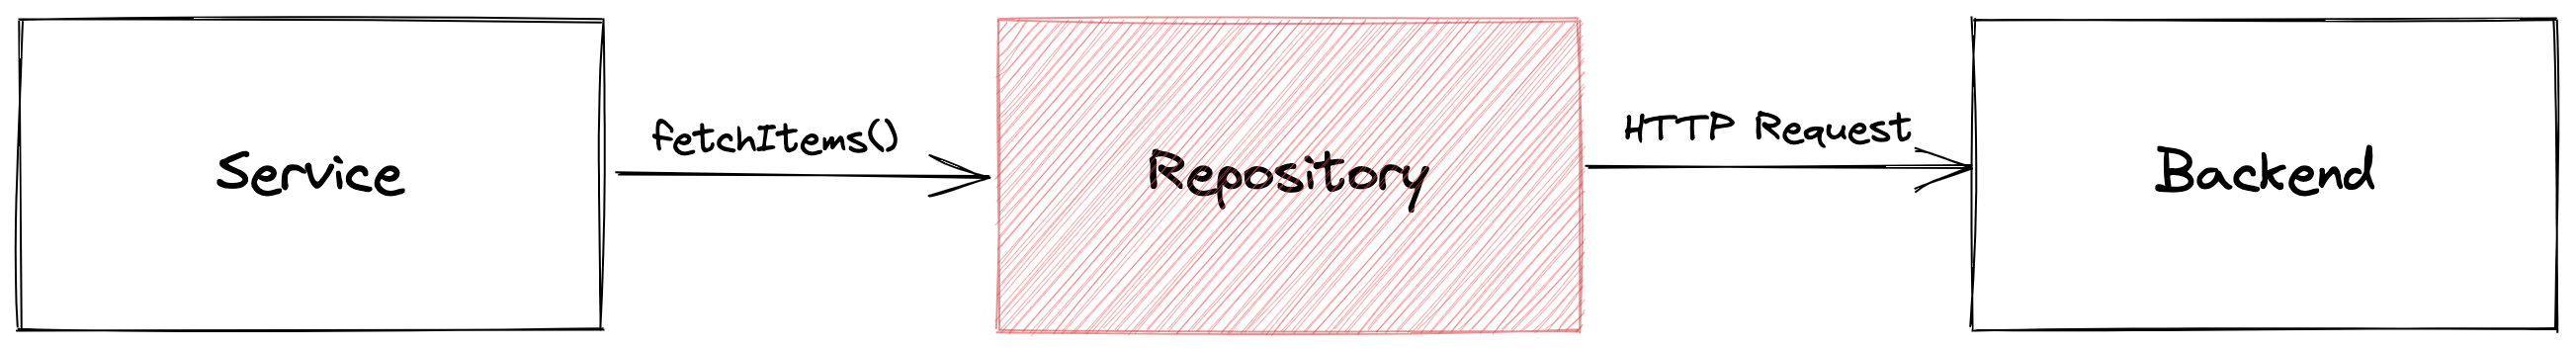 Architecture of the Repository Pattern